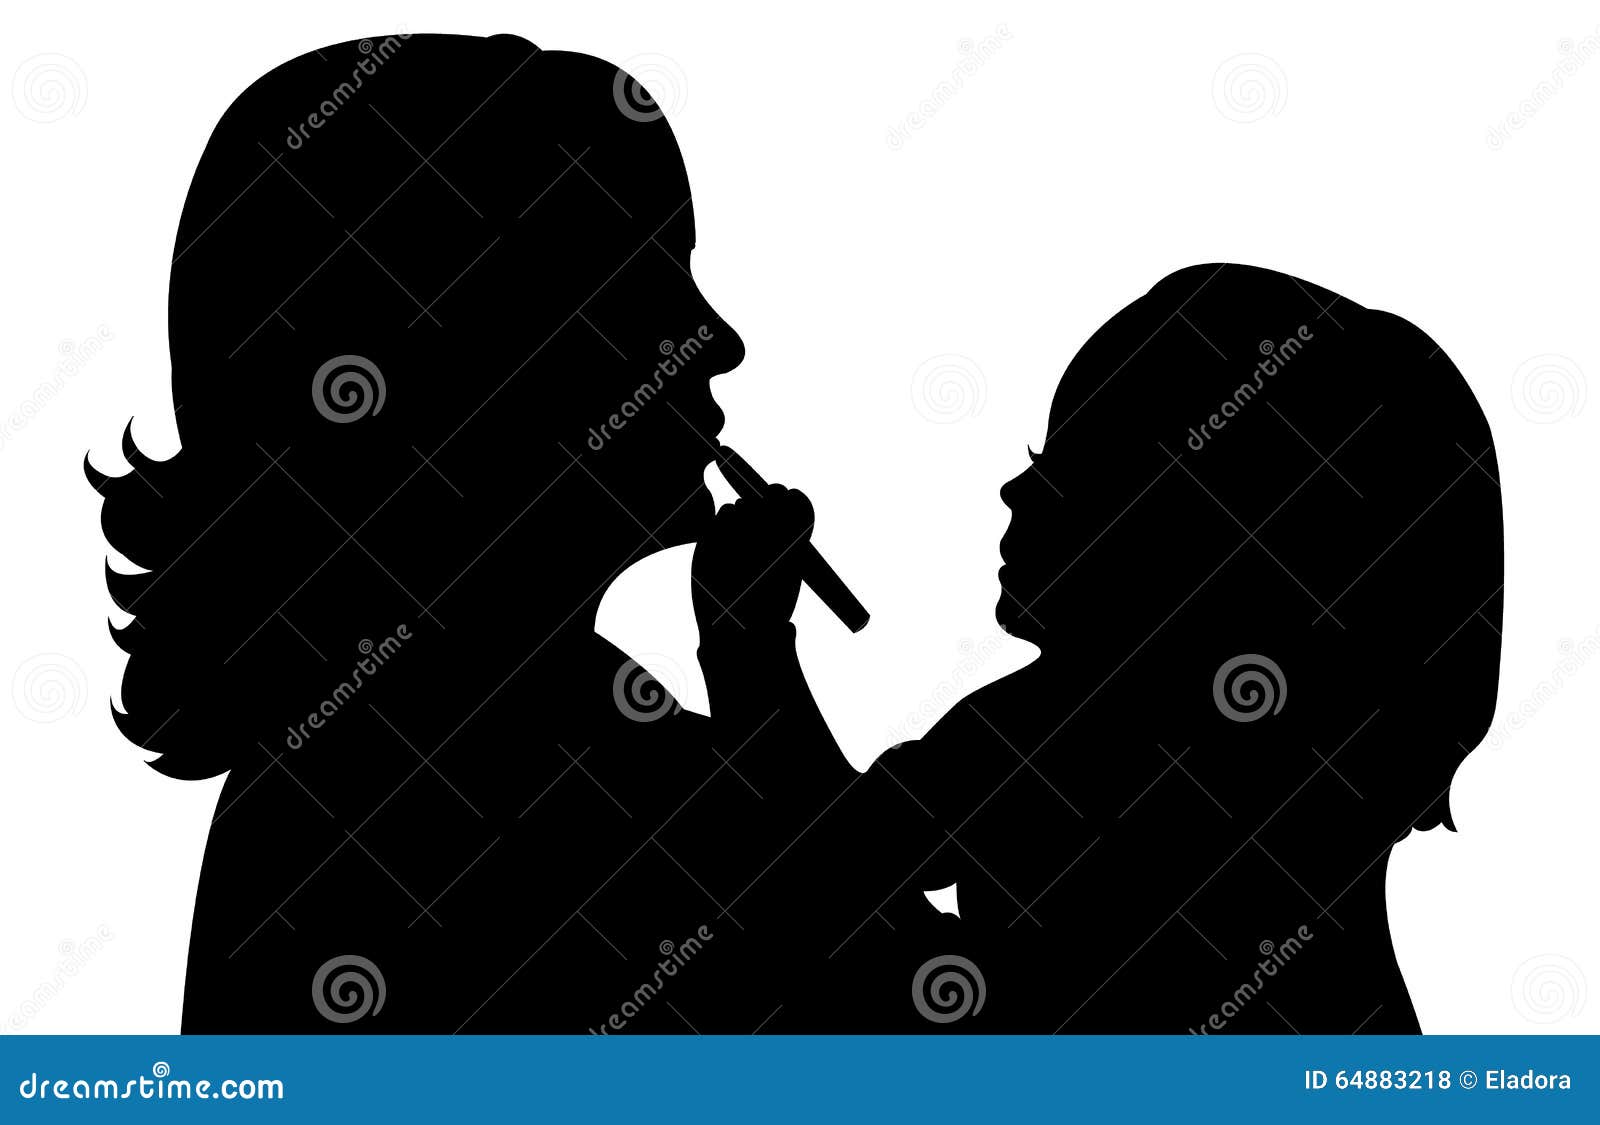 Cute girl applying lipstick on her mom, black color silhouette